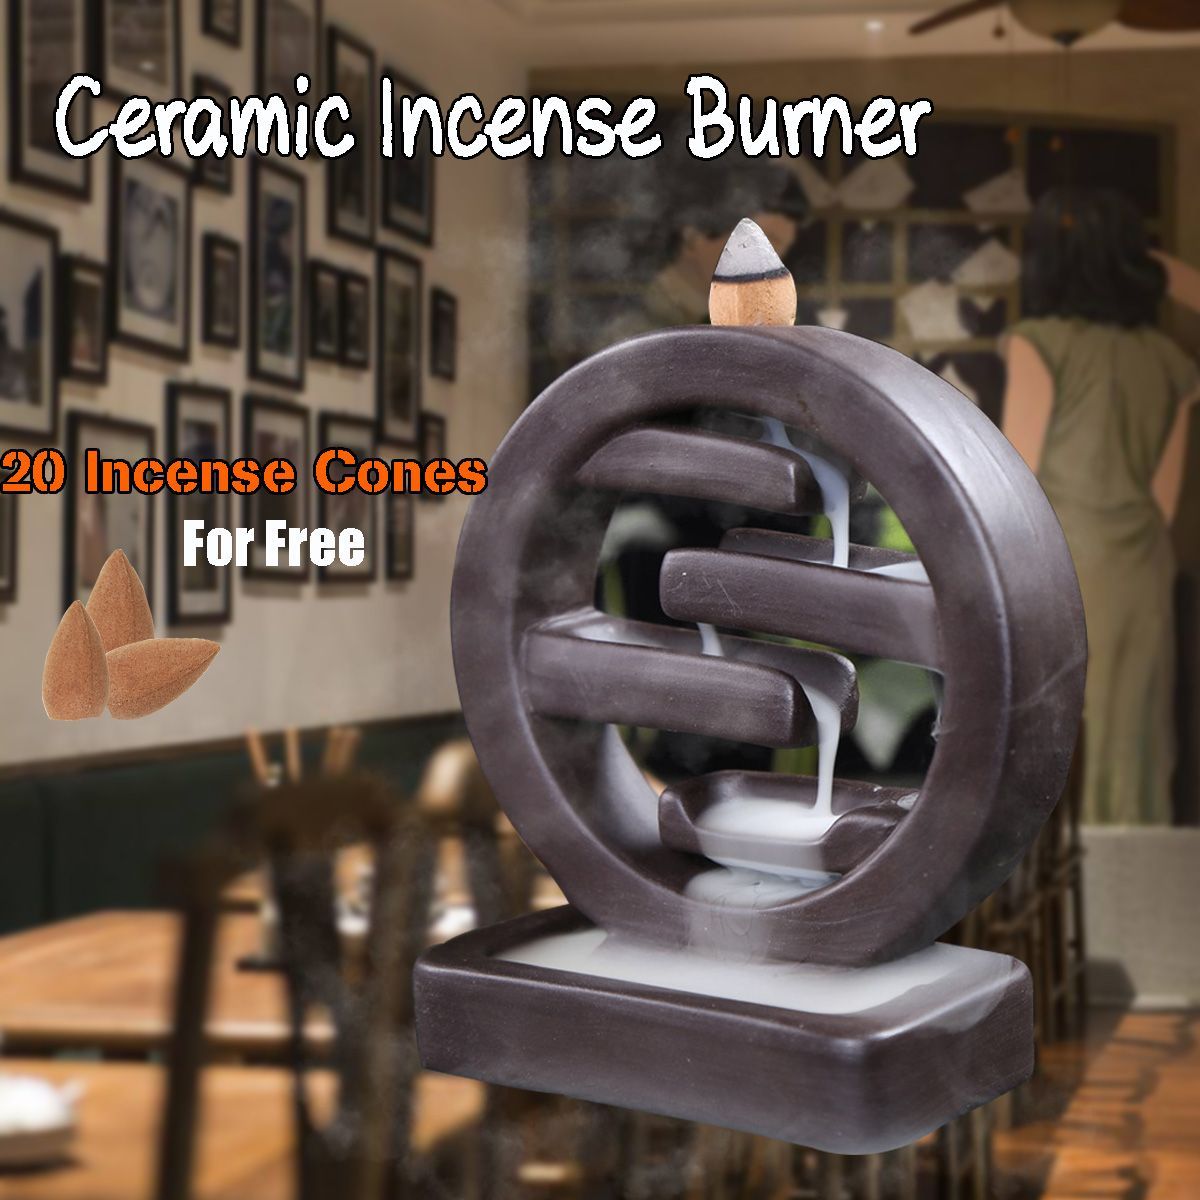 Round-Ceramic-Incense-Burner-Porcelain-Backflow-Smoke-Cone-Holder-With-20-Cones-Home-Office-Decor-1356476